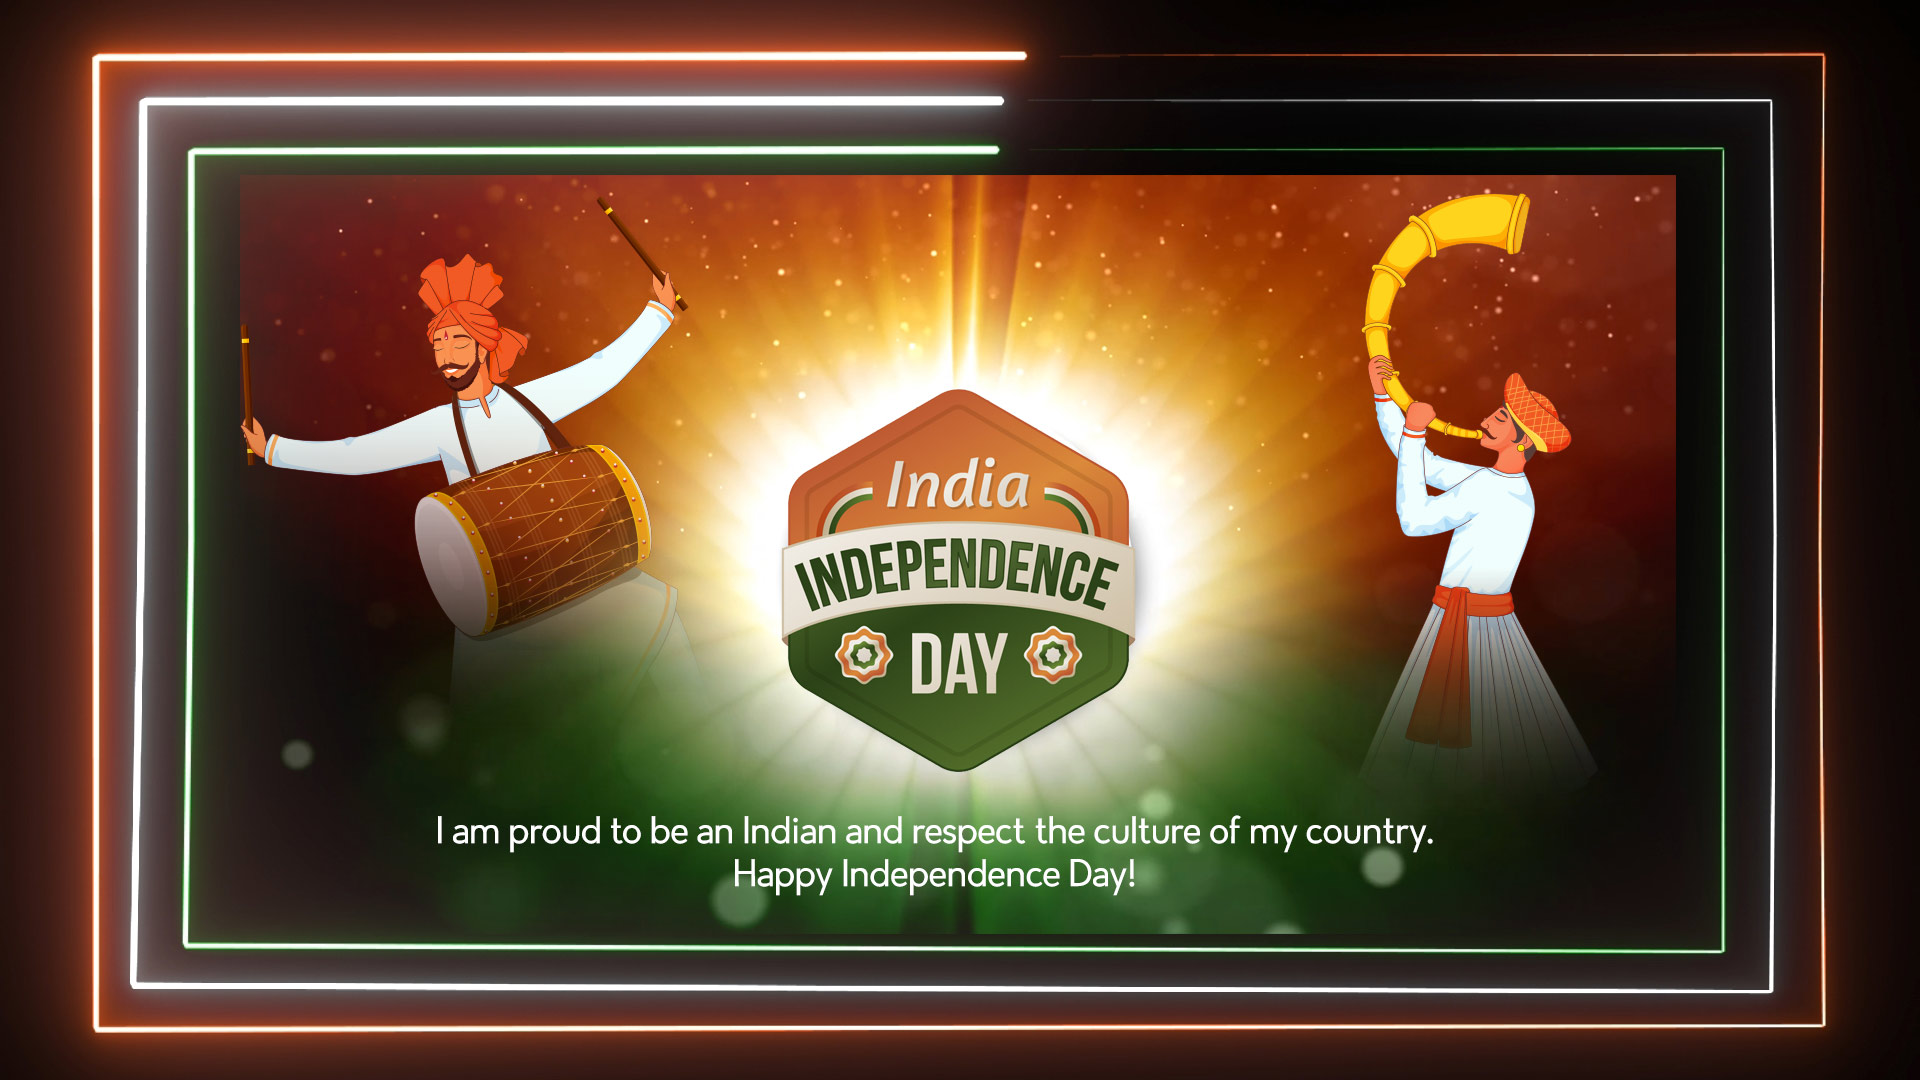 15 August latest free Indian Happy Independence Day images, wallpaper, greetings, wishes, quotes, status, messages, SMS whatsapp in full HD